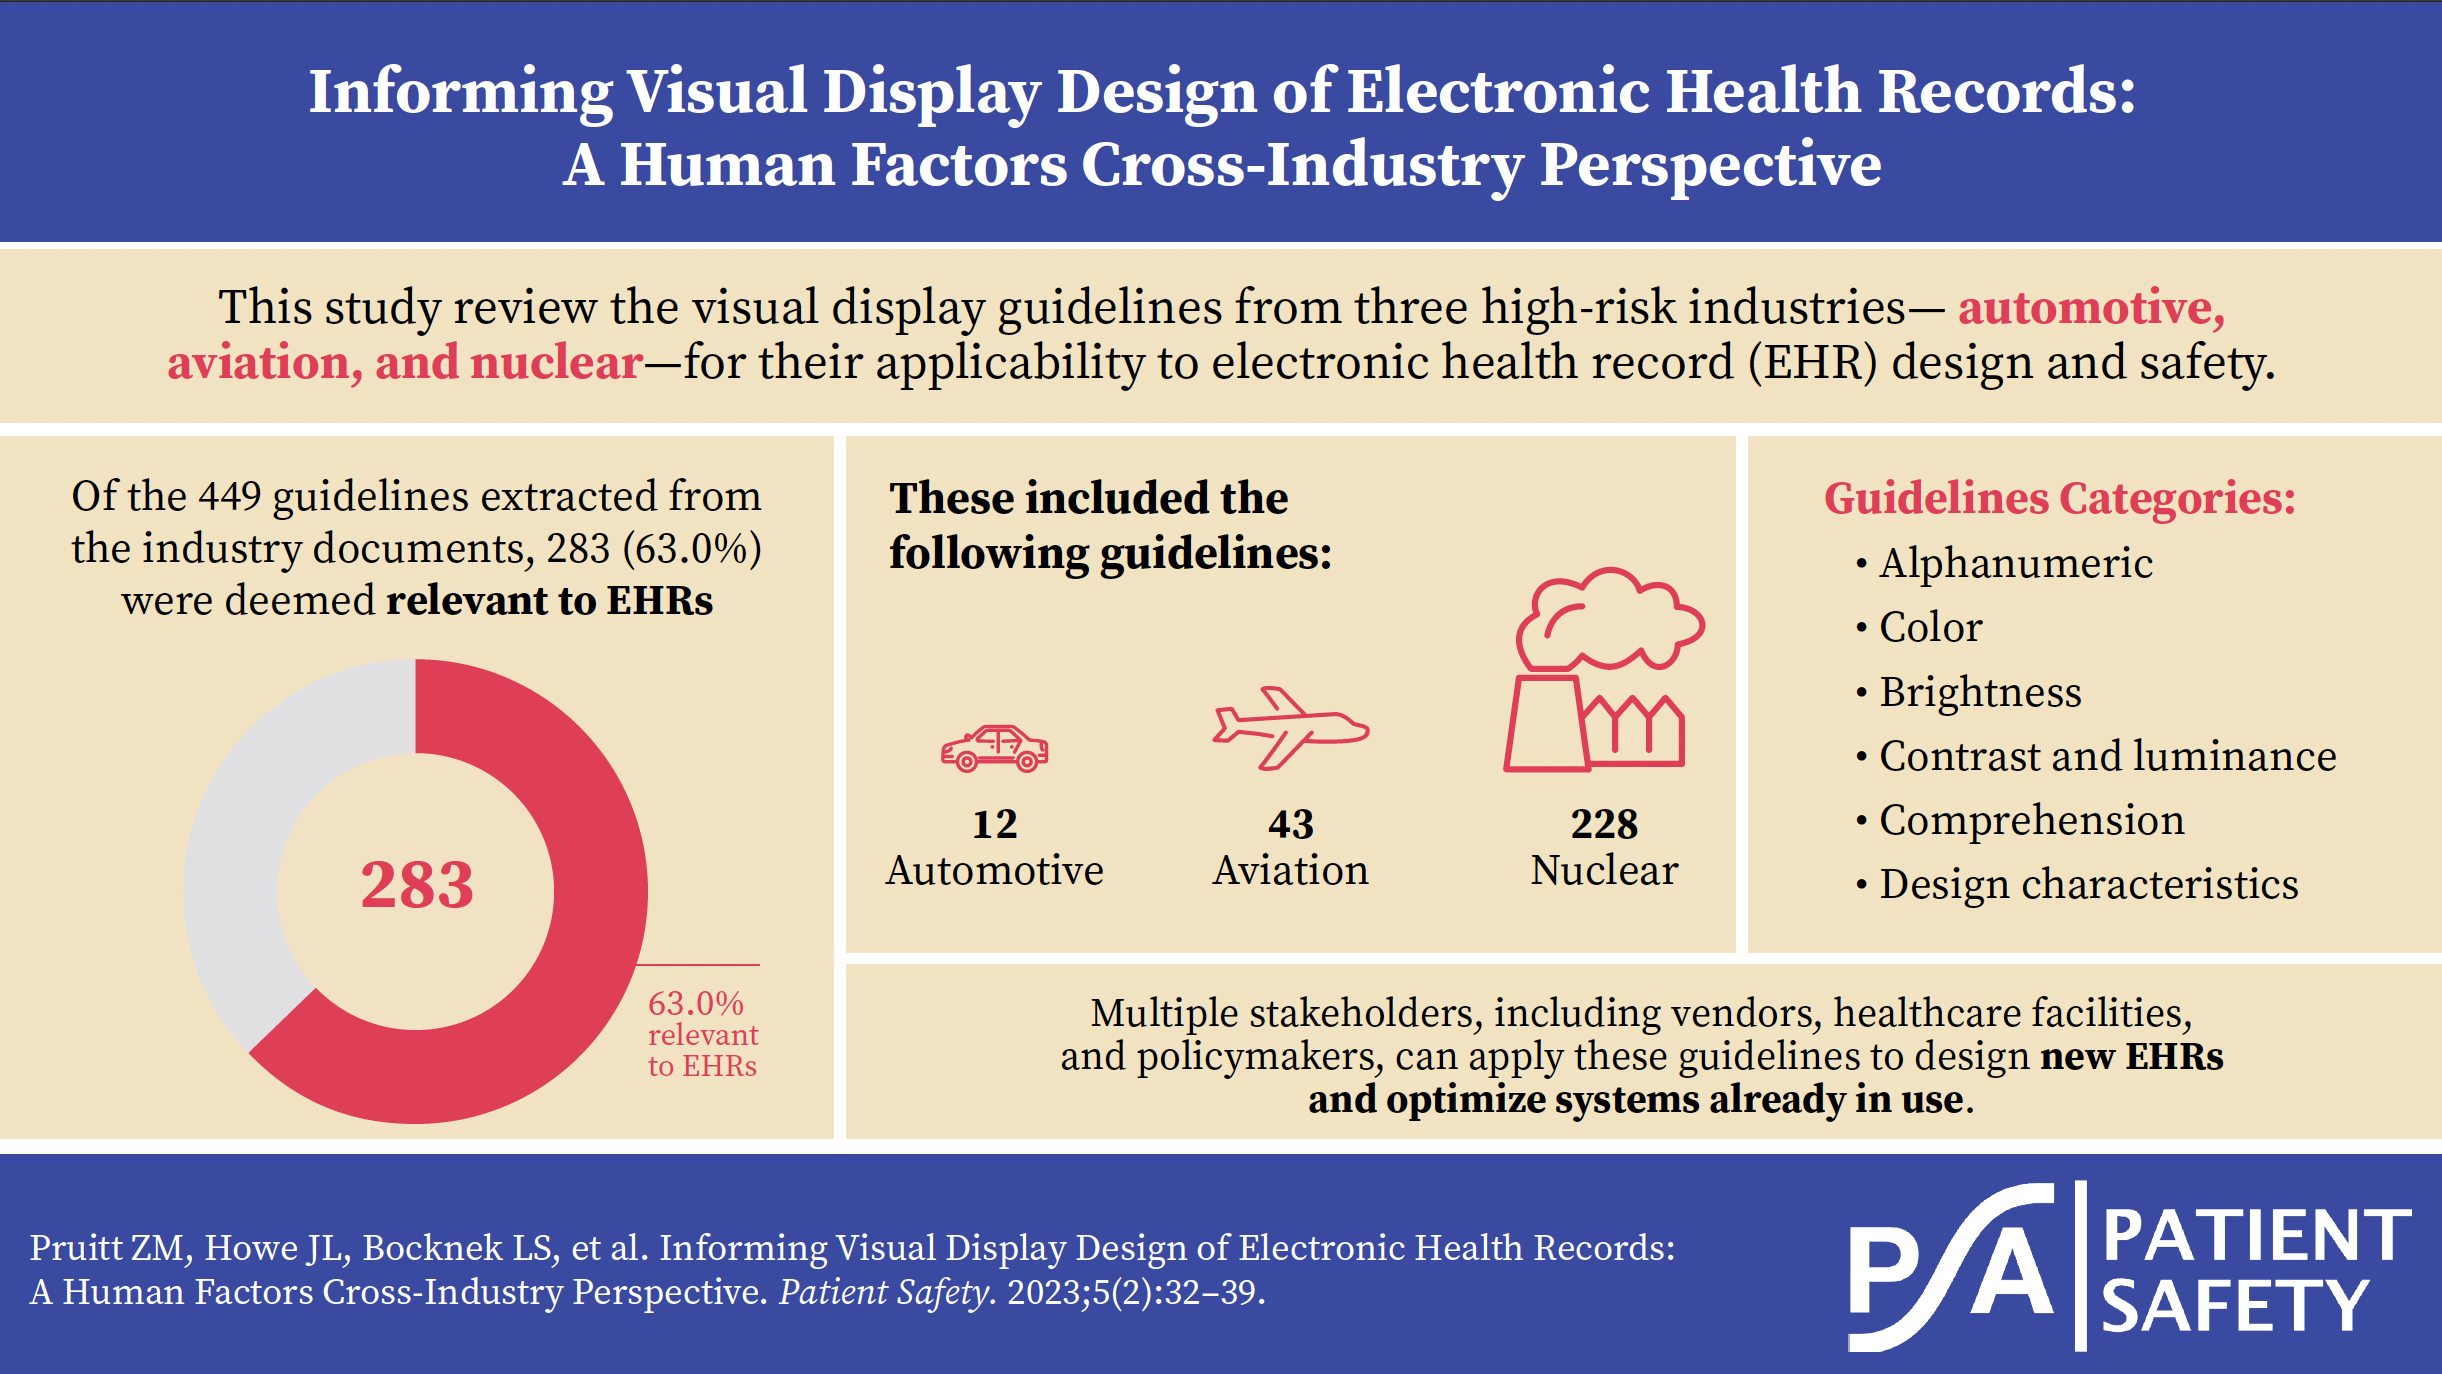 https://patientsafetyj.com/article/77769-informing-visual-display-design-of-electronic-health-records-a-human-factors-cross-industry-perspective/attachment/163884.png